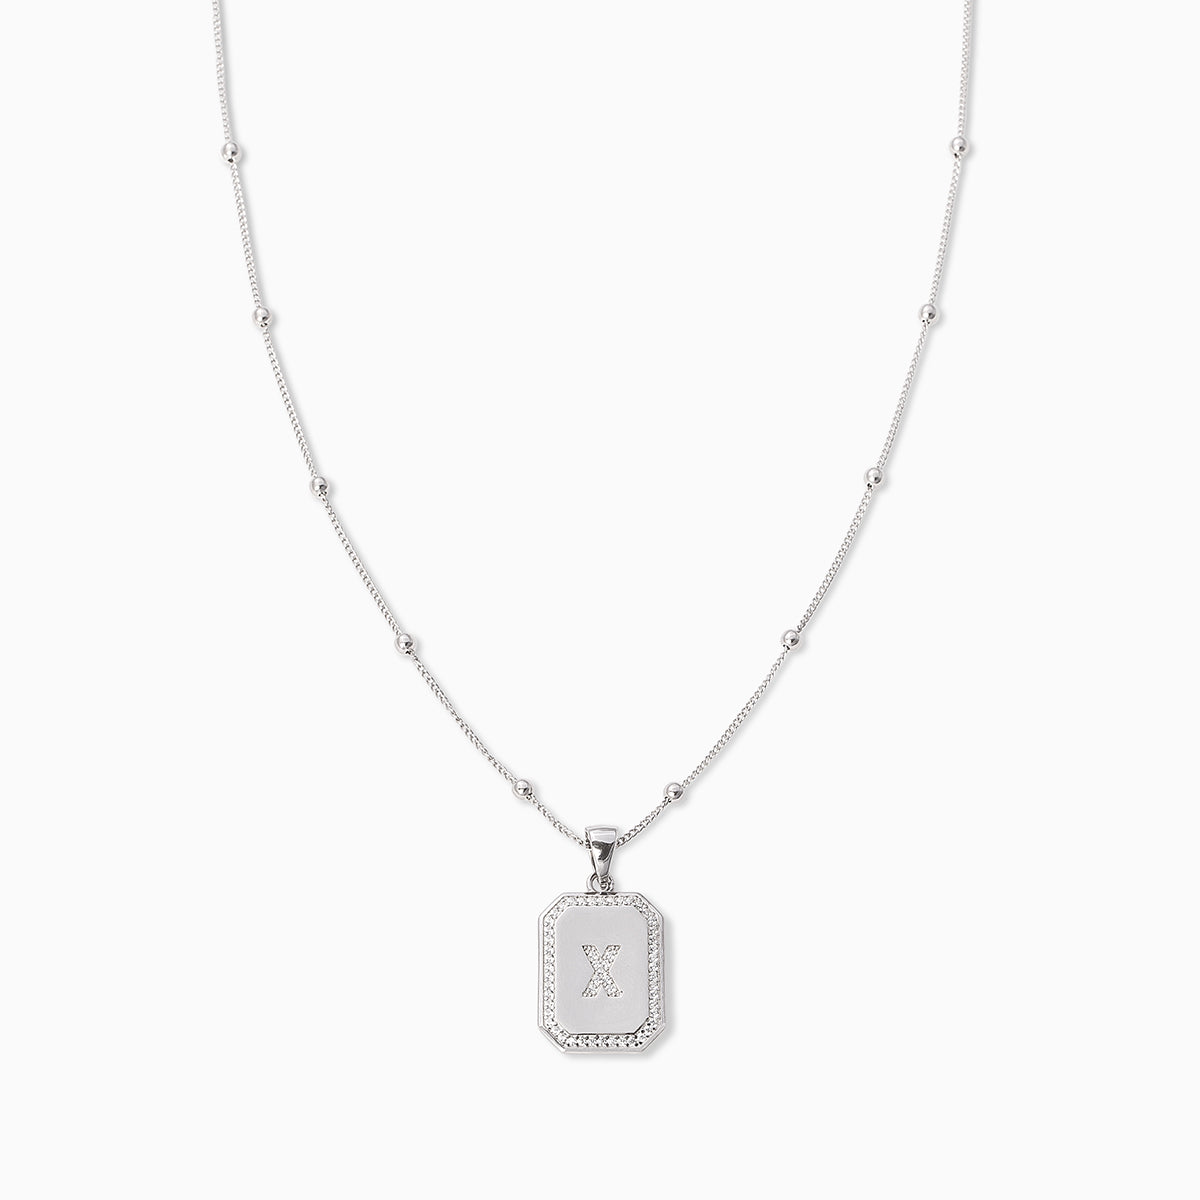 Sur 2.0 Necklace | Sterling Silver X | Product Image | Uncommon James